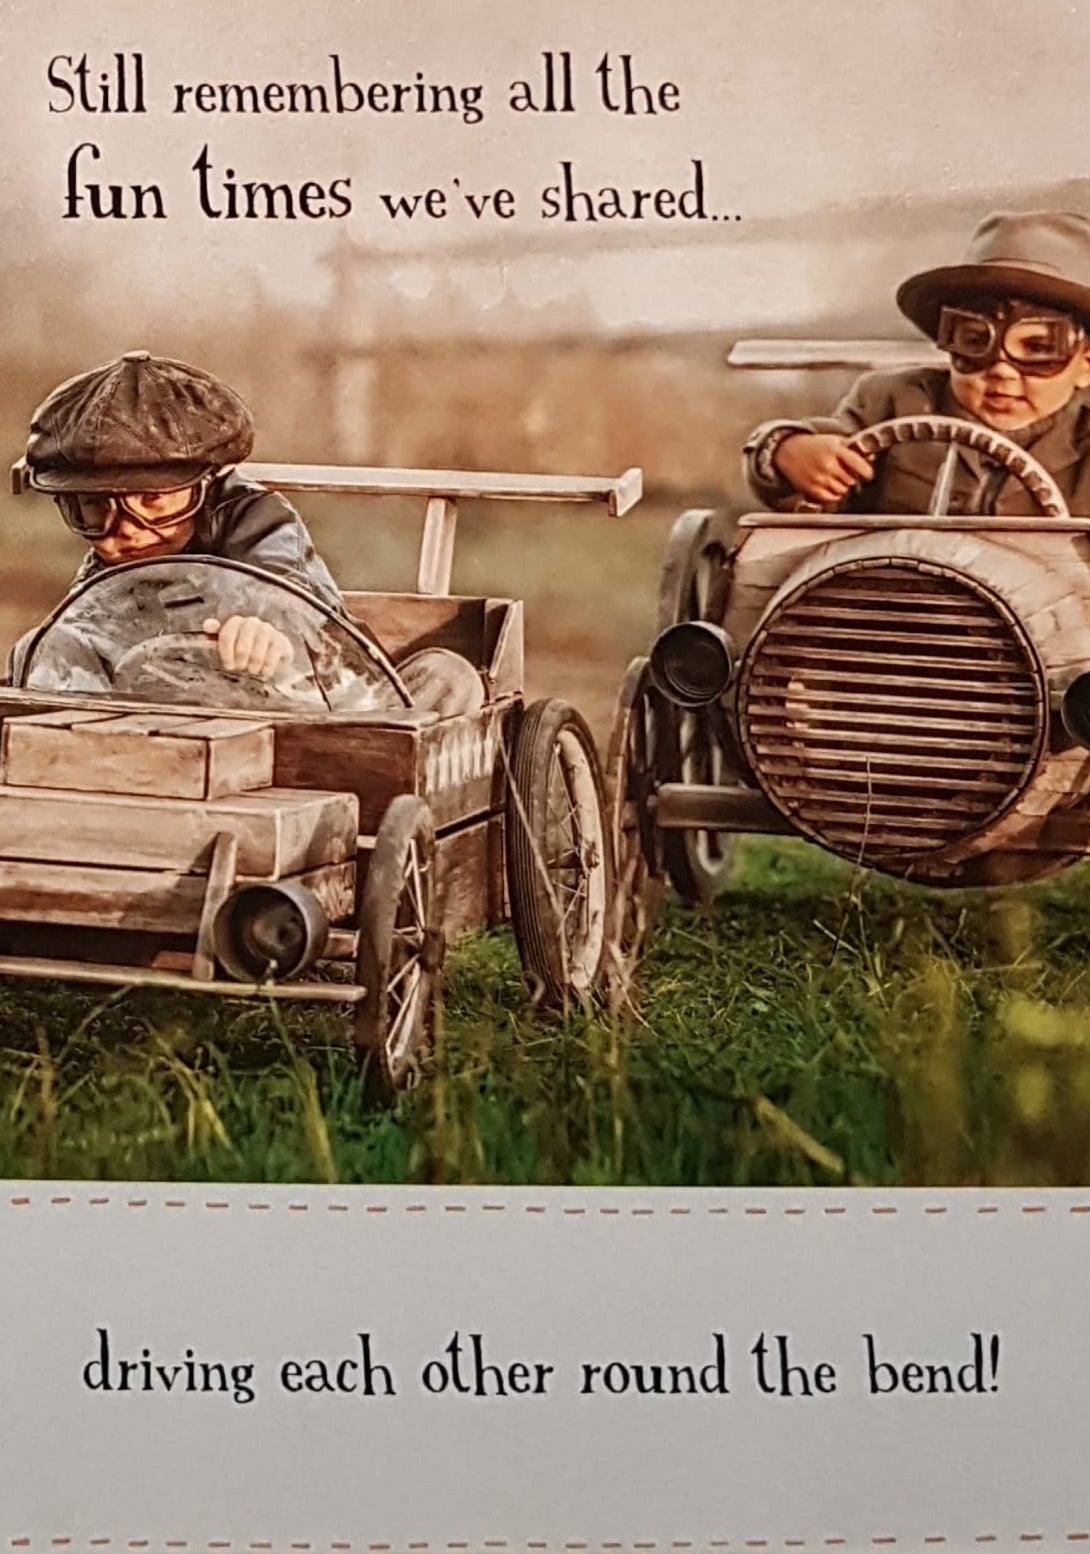 Birthday Card - Two Children Playing In Toy Cars